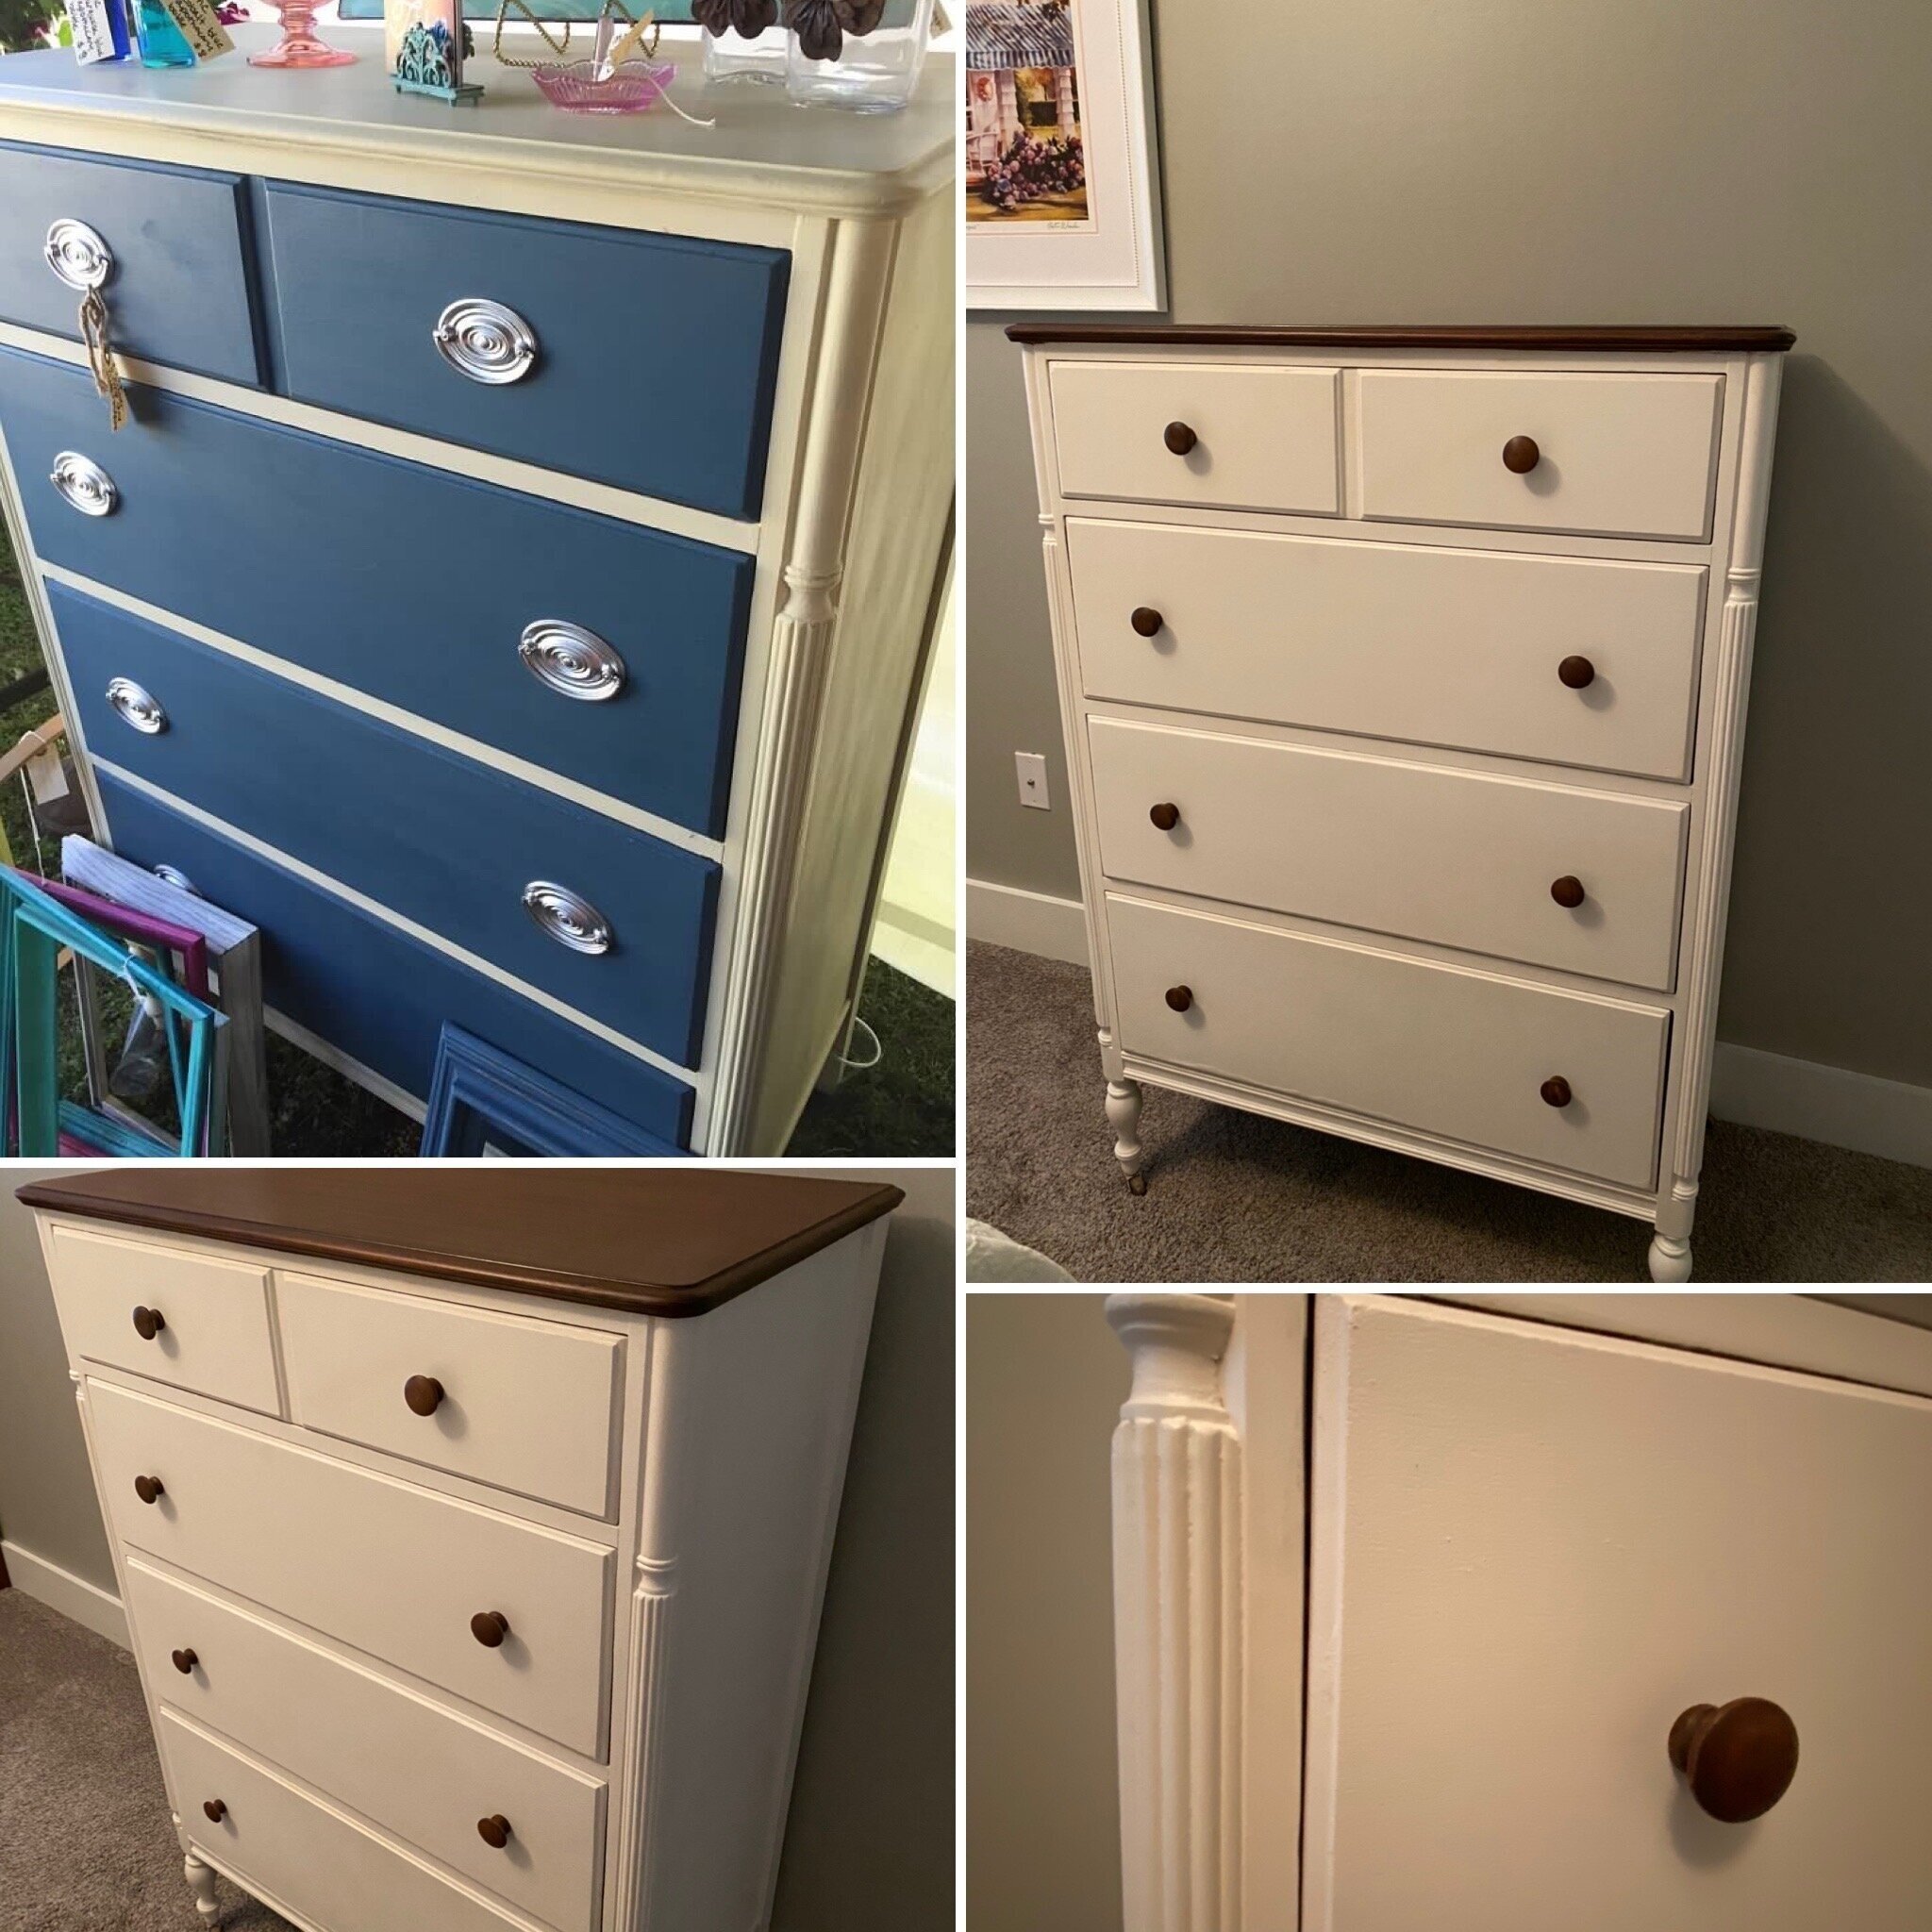 Chalk Painted Furniture: Upgrading a Painted Chest of Drawers